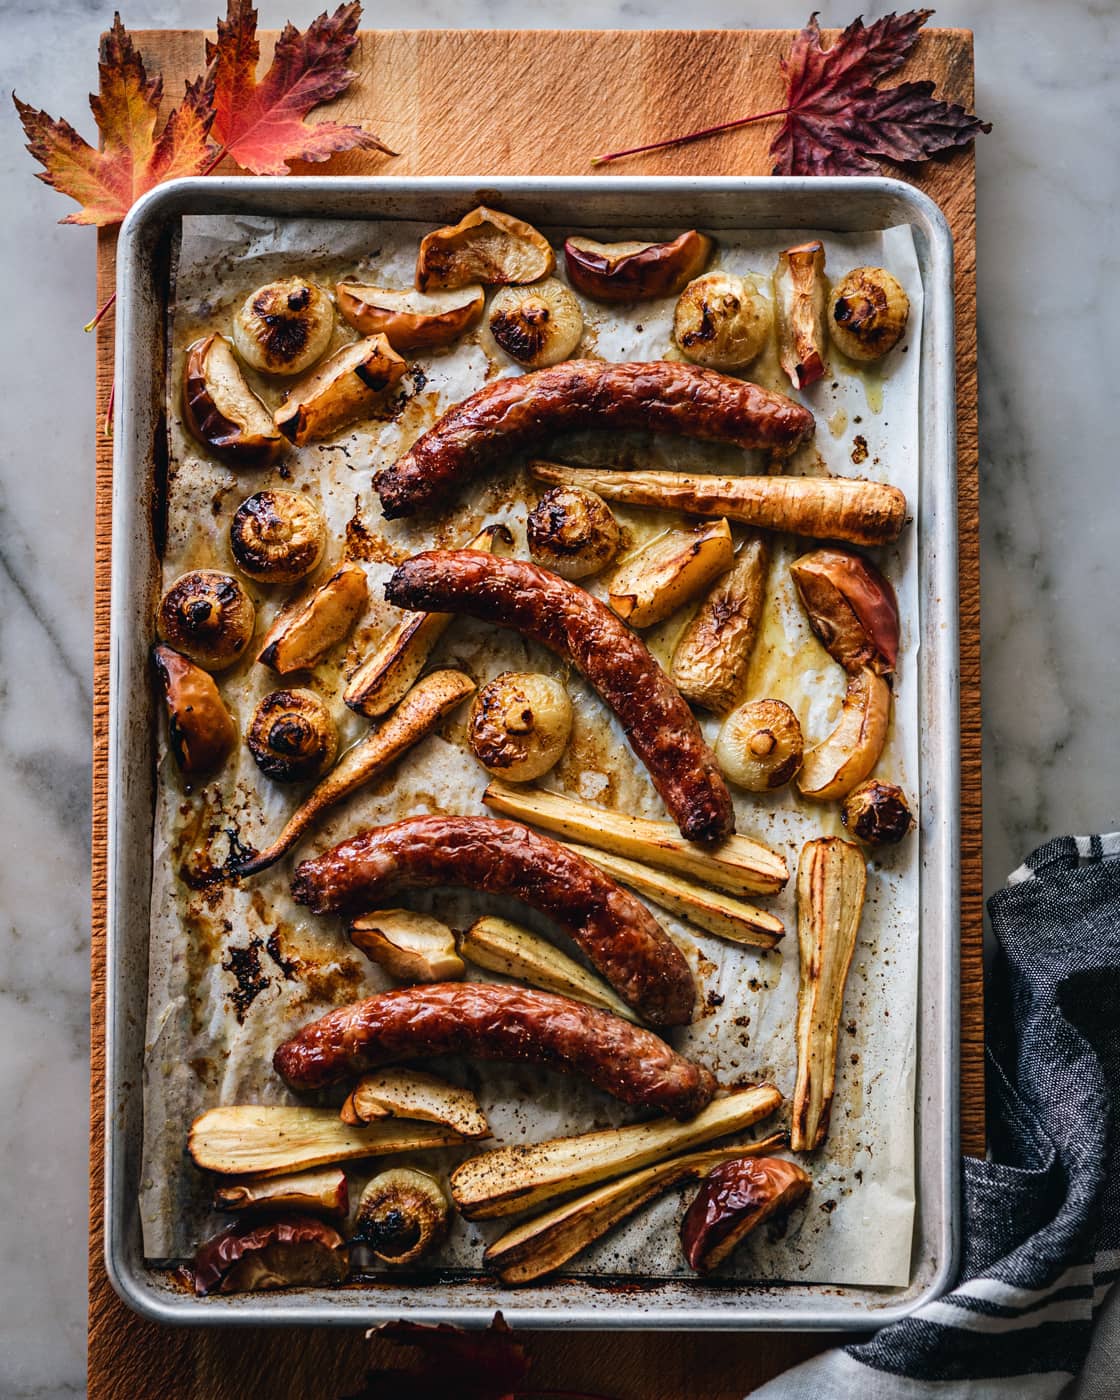 TUSCAN SAUSAGE WITH ROASTED APPLES AND PARSNIPS